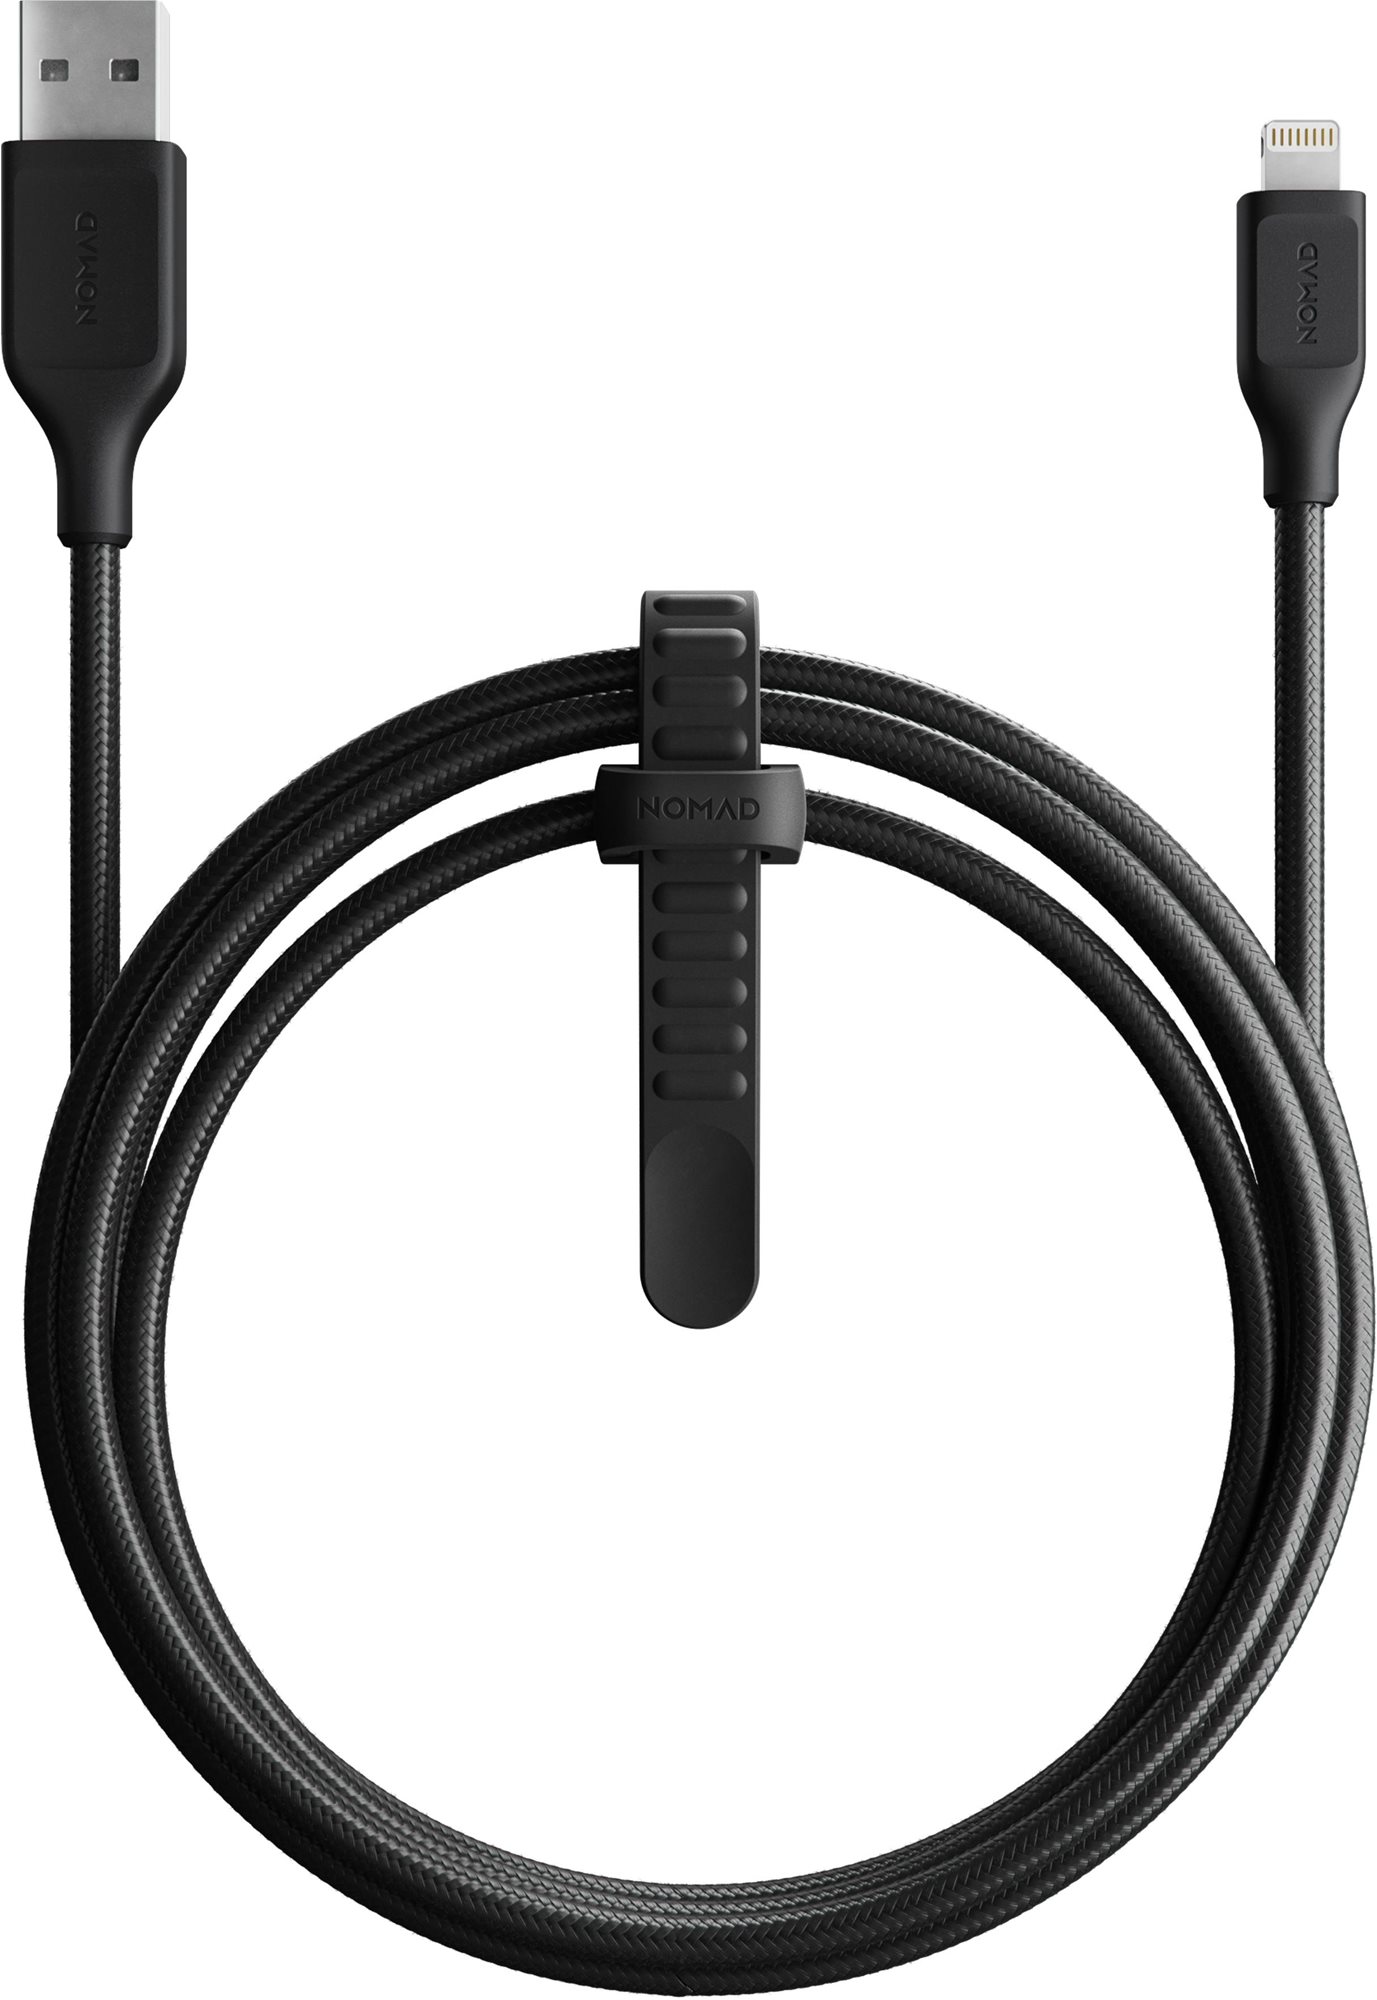 Nomad Sport USB-A to Lightning Cable 2m